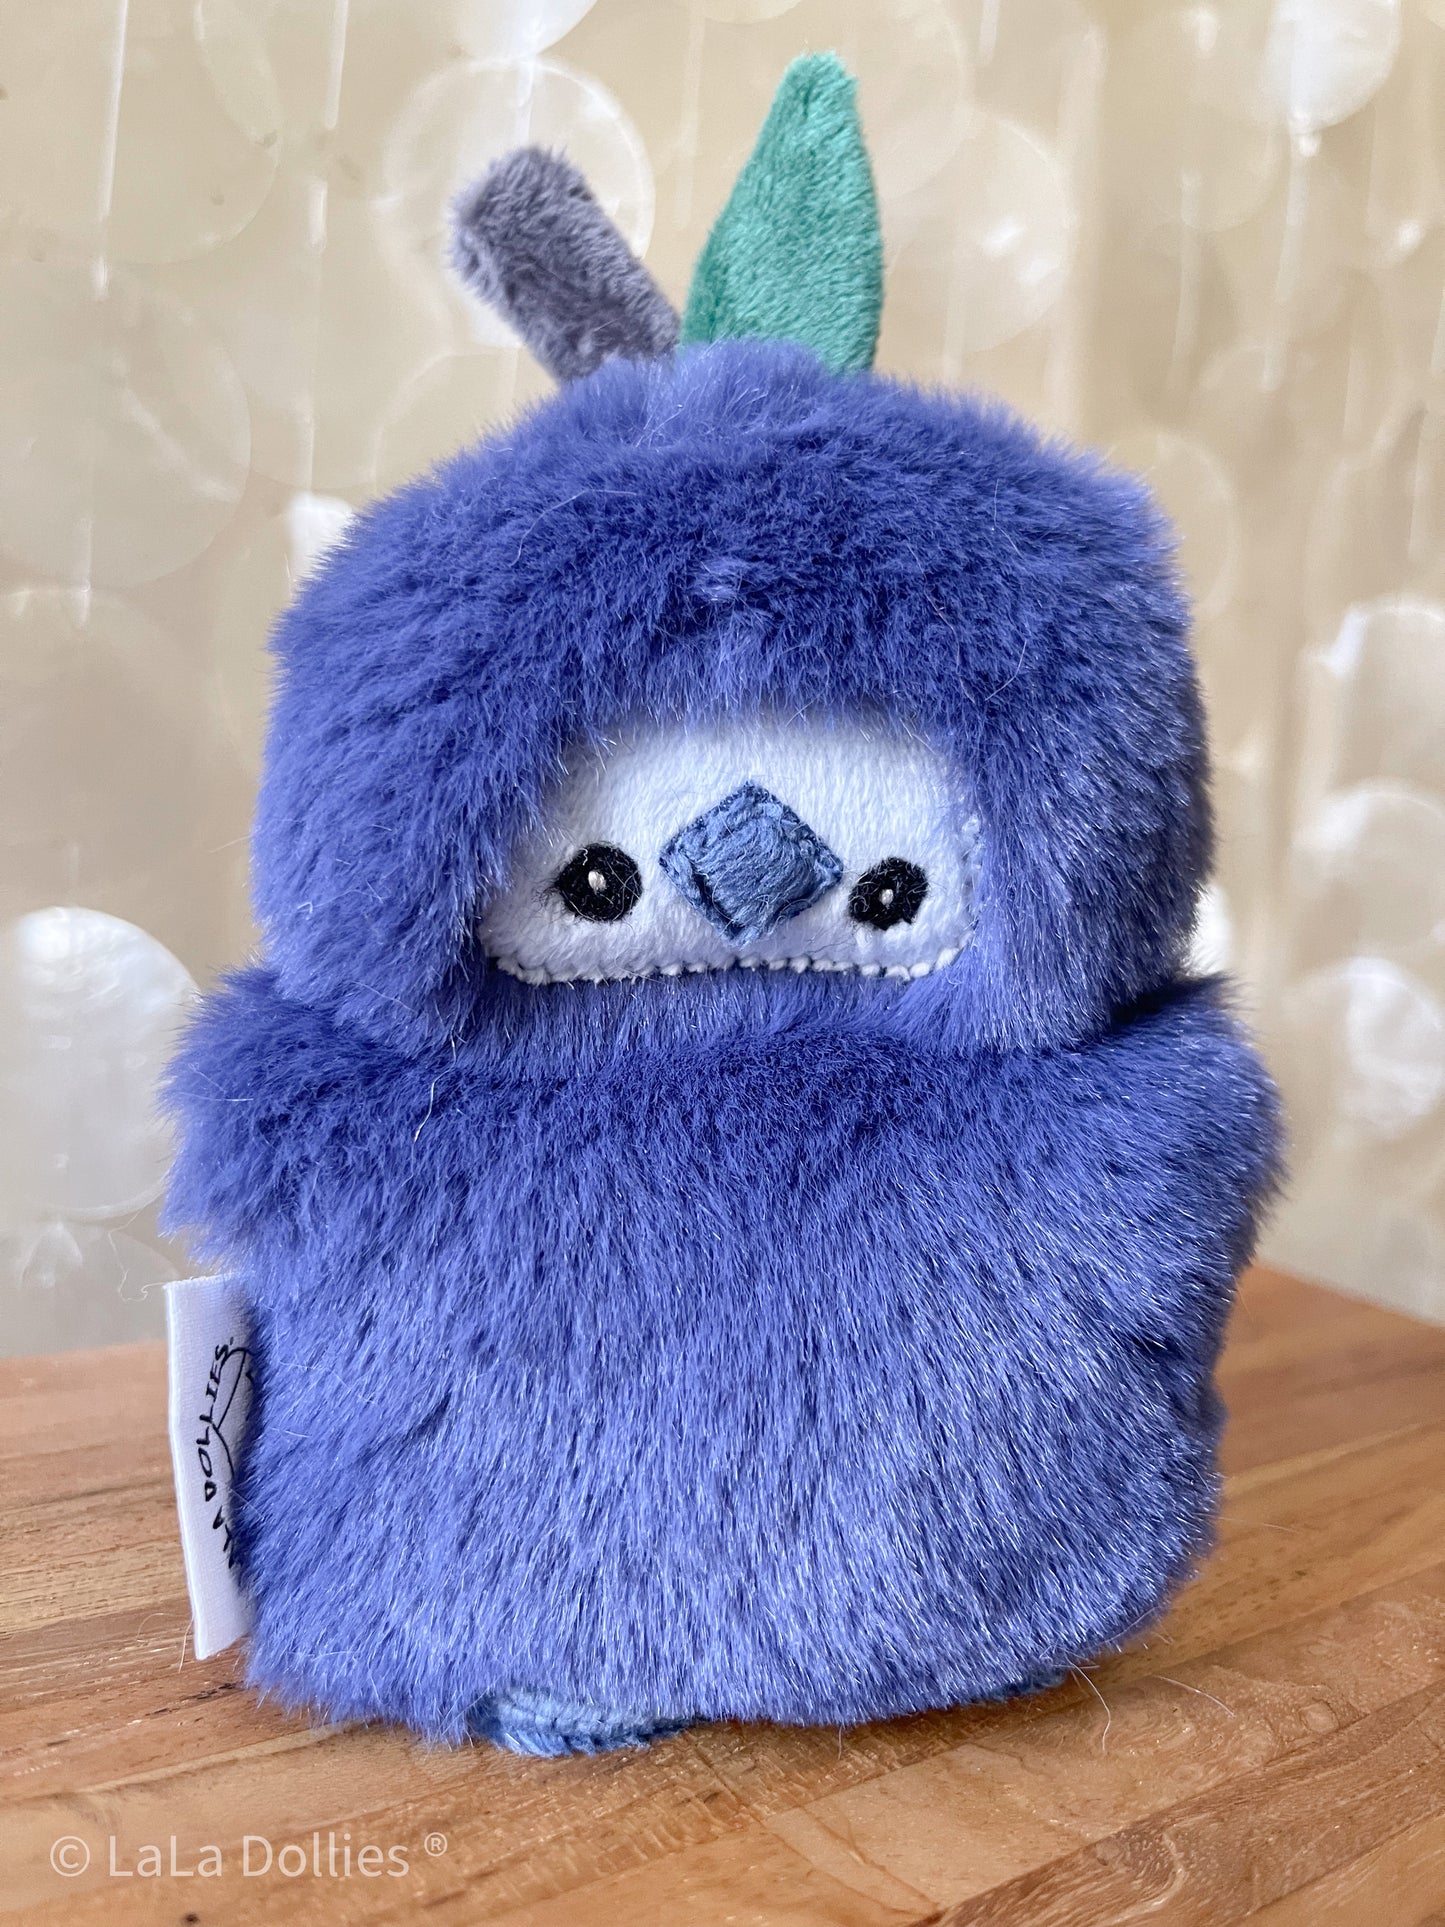 Blueberry Mini Chick | LALA DOLLIES ® | LIMITED